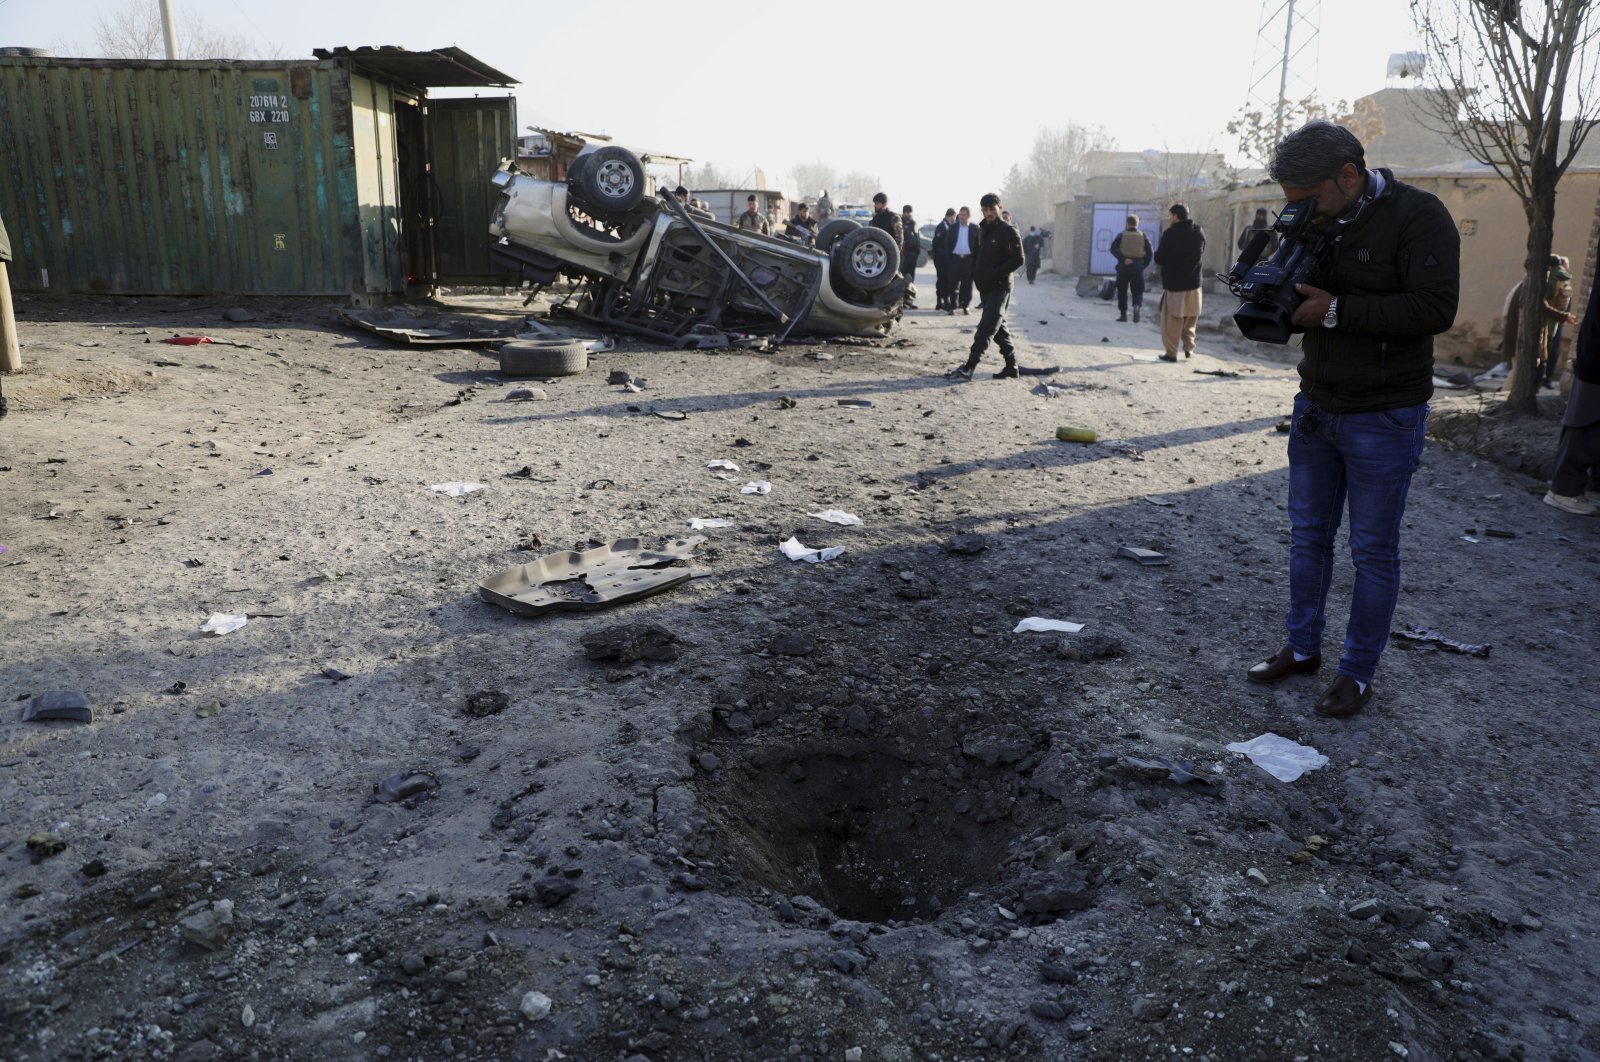 An Afghan journalist films at the site a bombing attack in Kabul, Afghanistan, Wednesday, Dec. 16, 2020. A bombing attack on Wednesday in the Afghan capital of Kabul wounded a few people, Ferdaws Faramarz, a spokesman for the Kabul police chief said. (AP Photo)